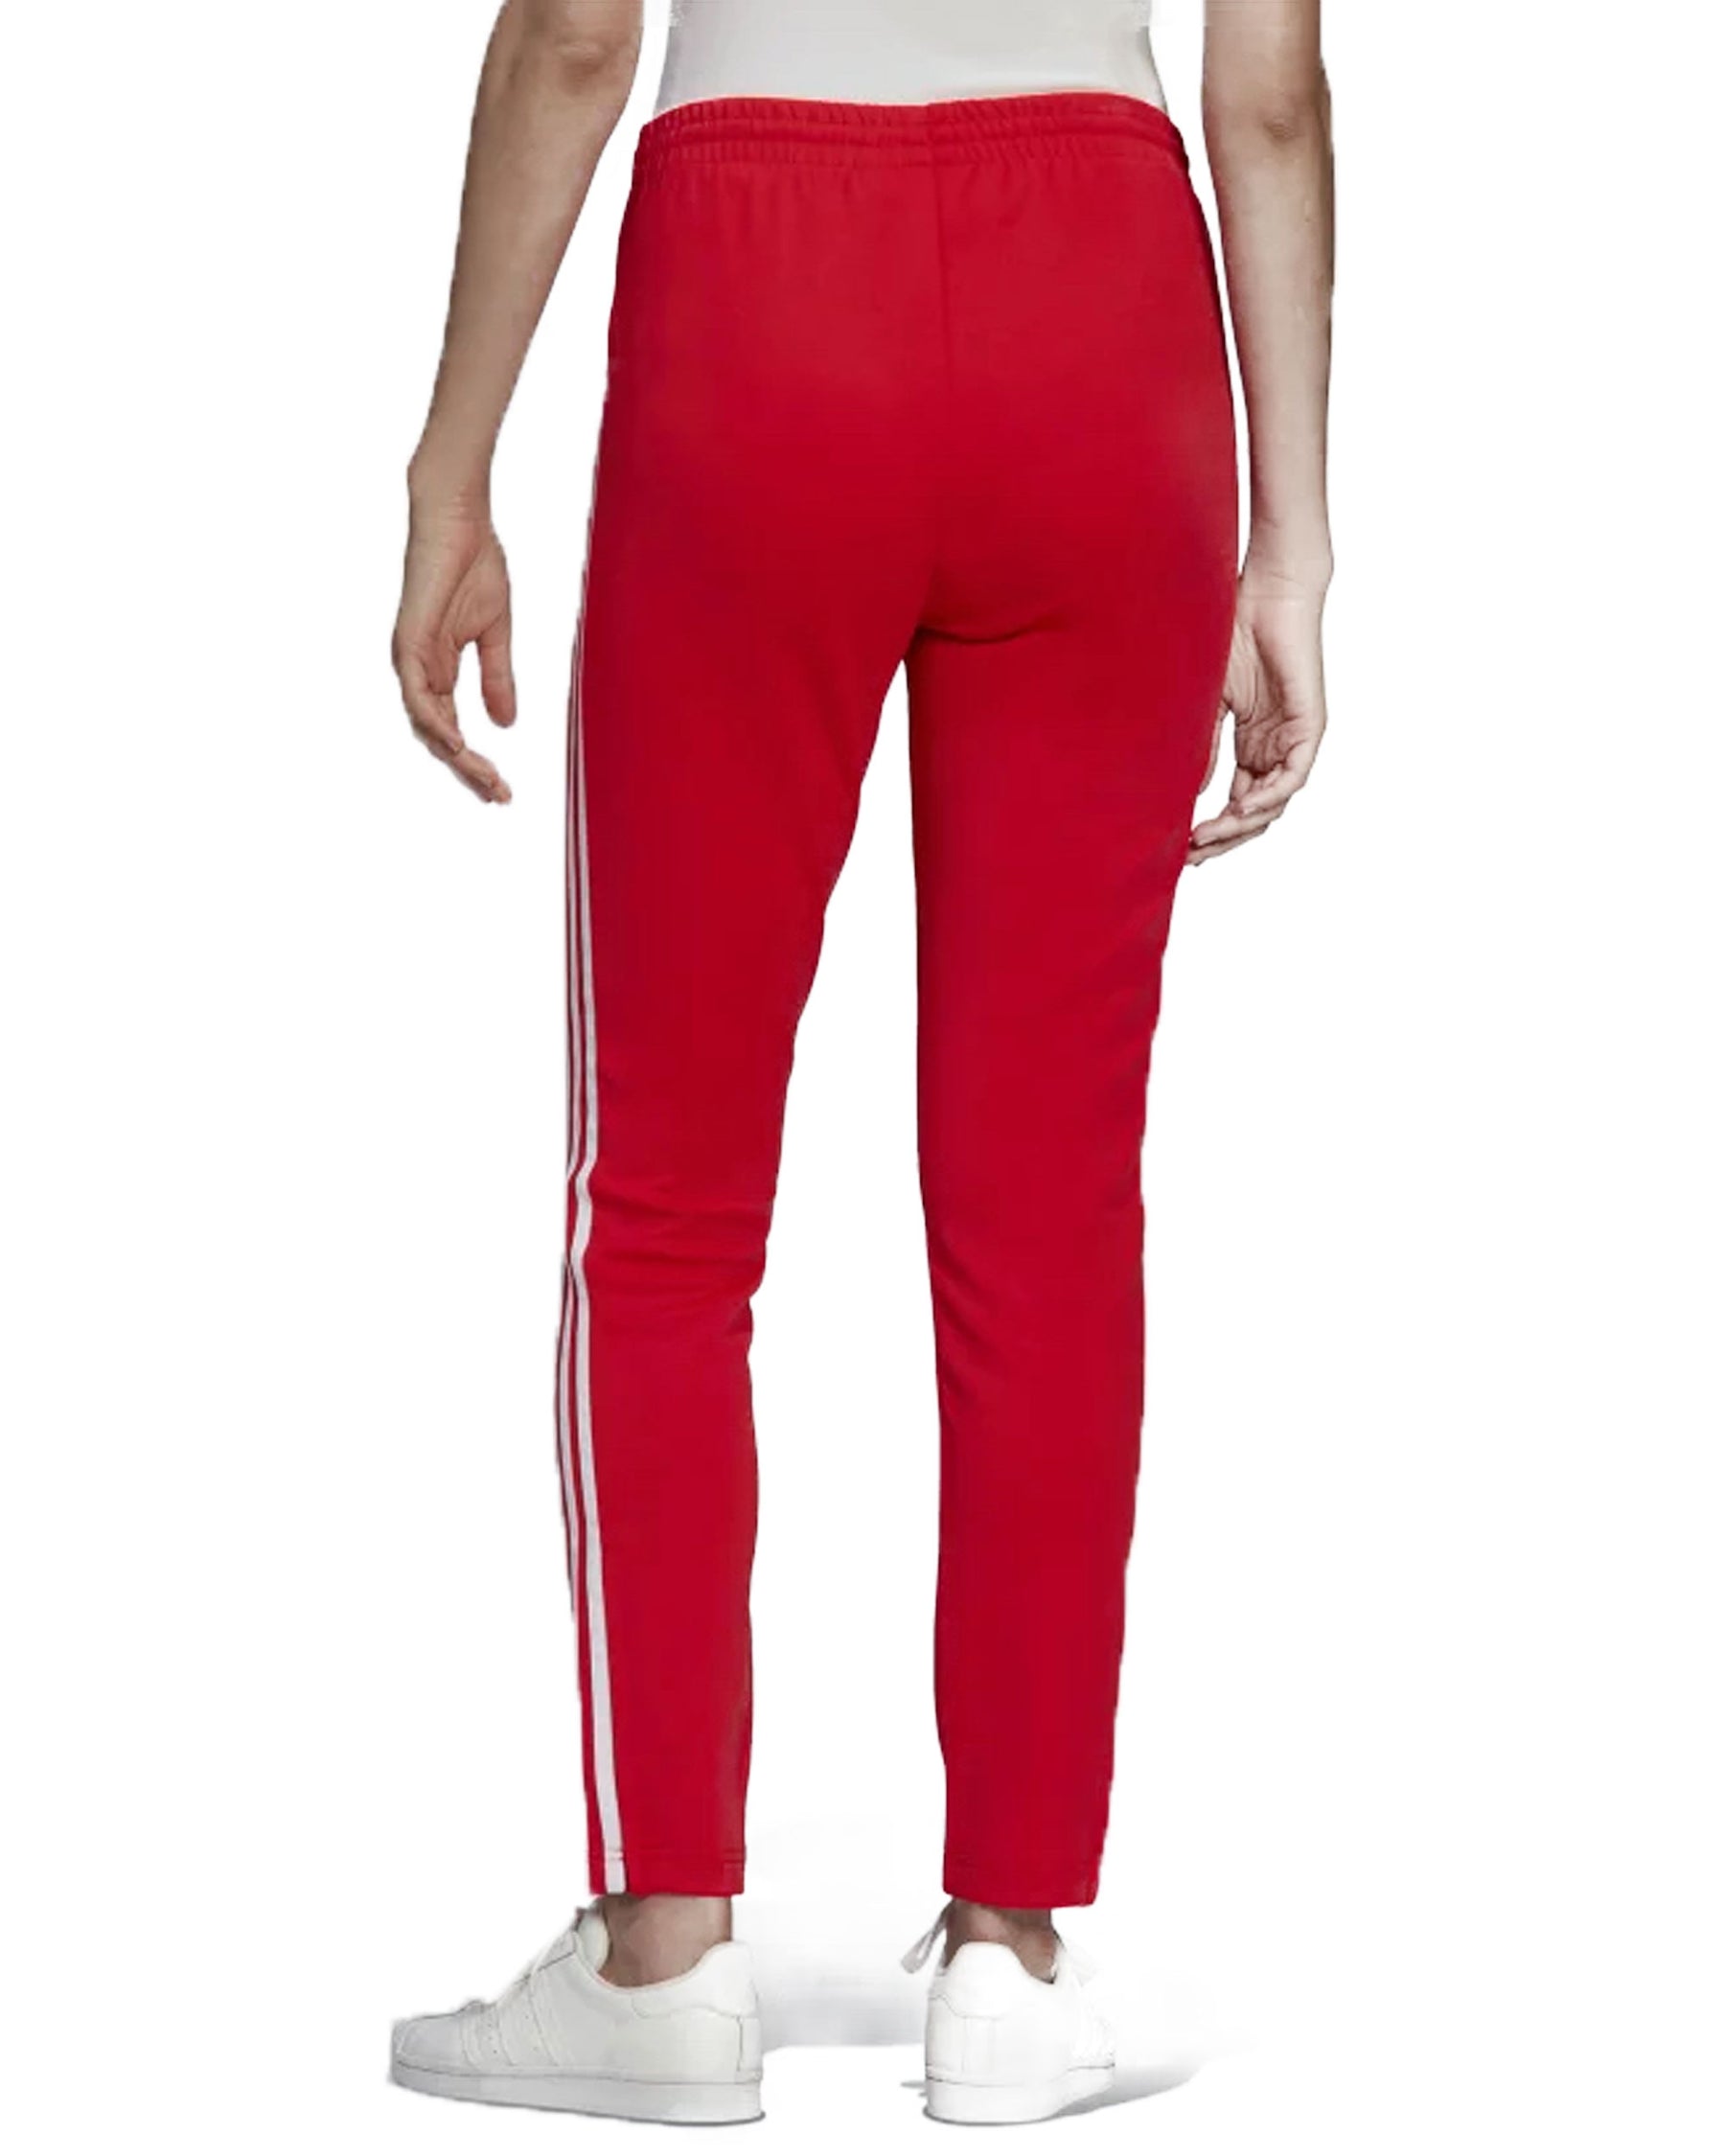 Woman Pant Adidas Superstar Red